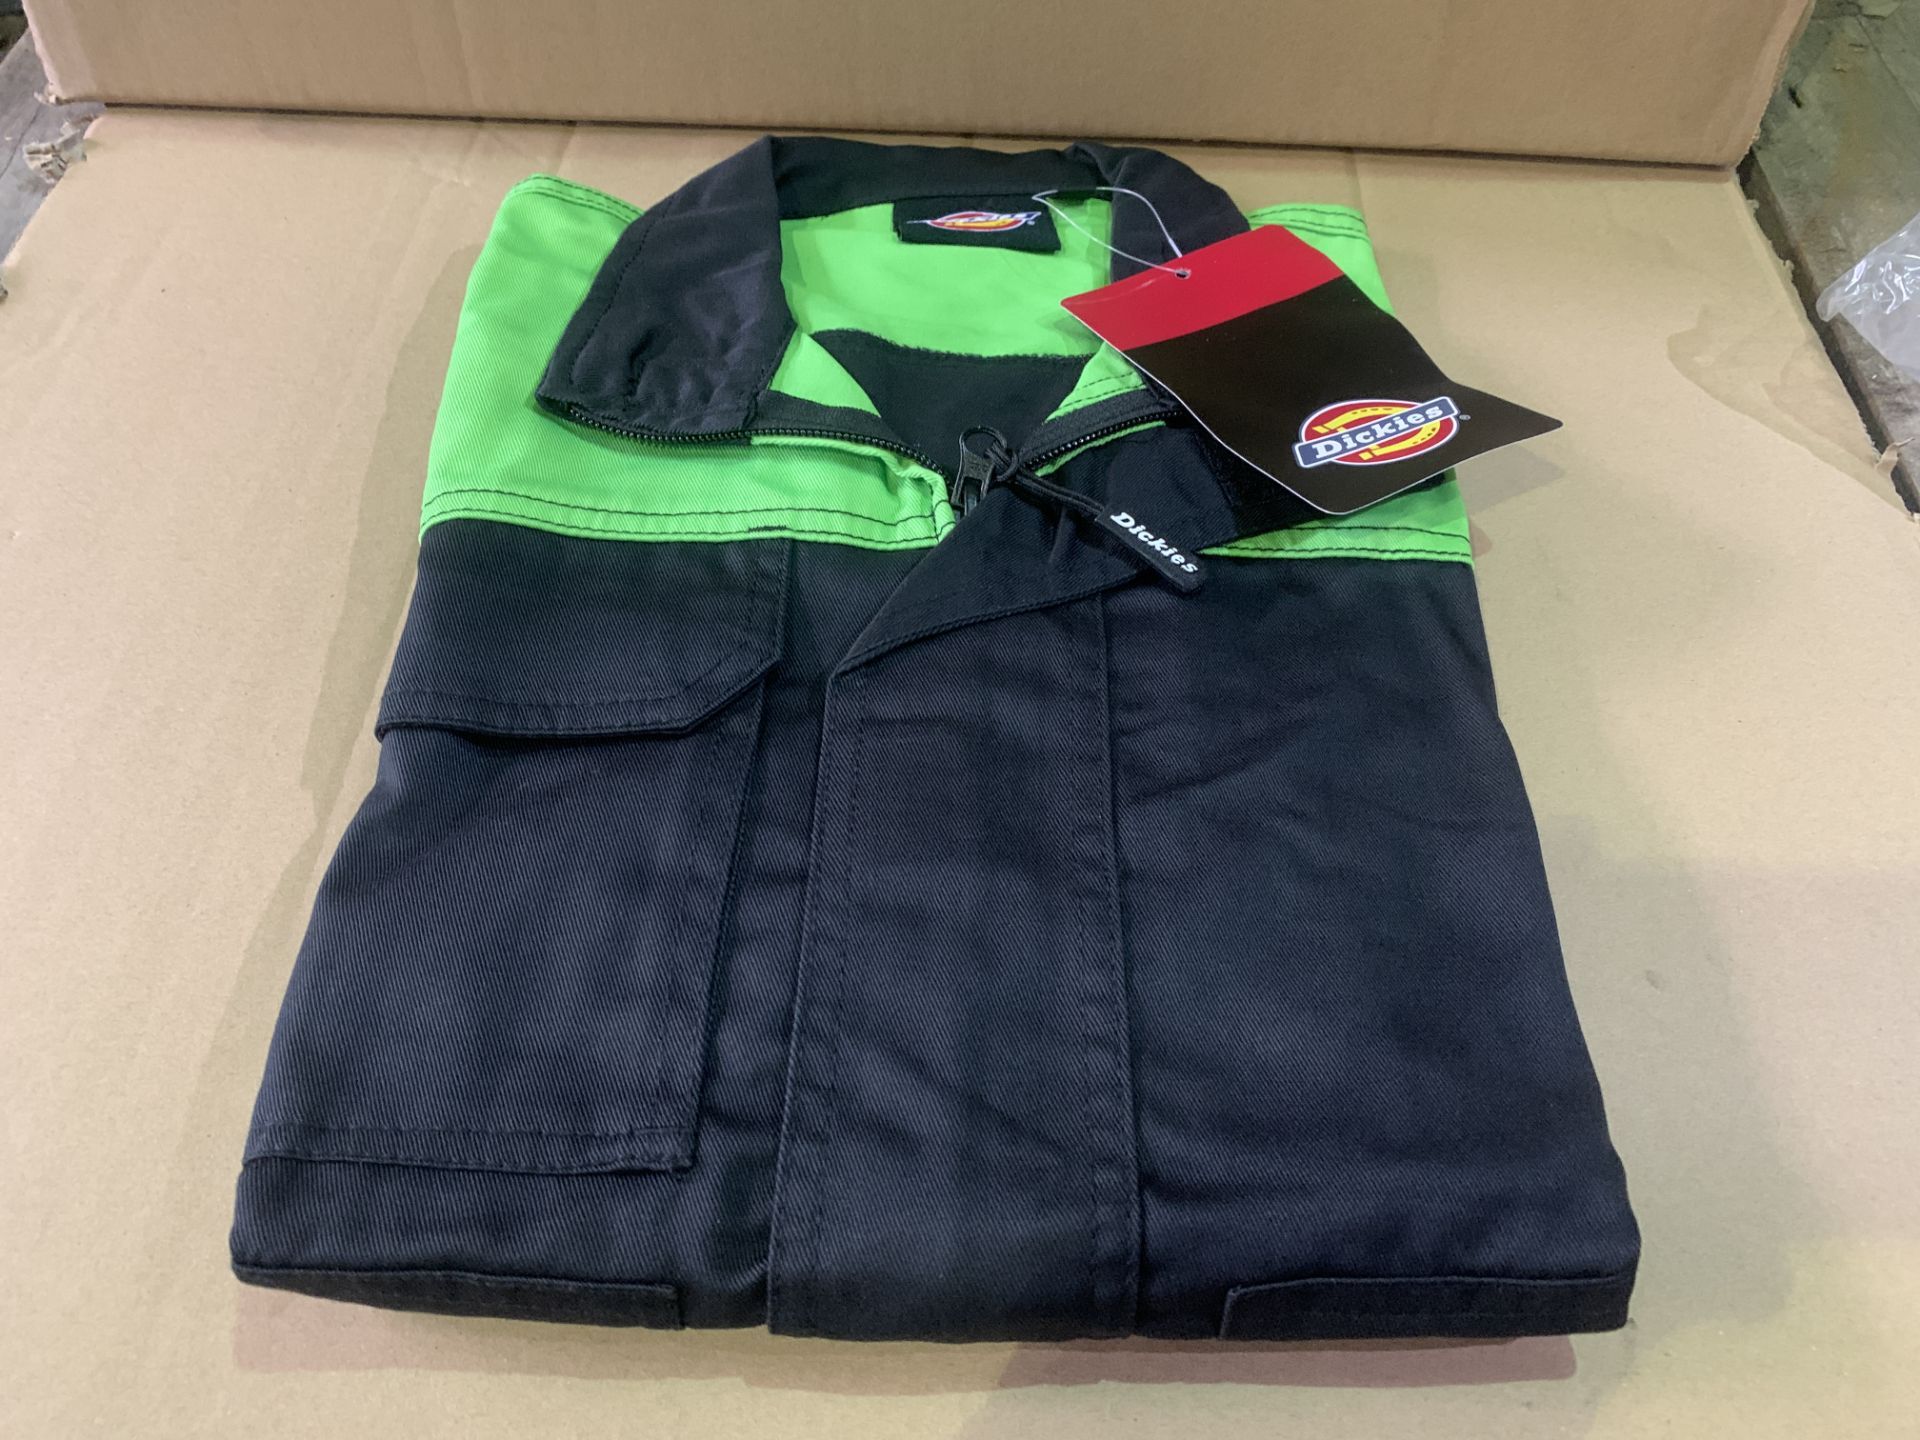 5 X BRAND NEW DICKIES EVERYDAY BLACK/LIME JACKETS SIZE SMALL RRP £45 EACH R15